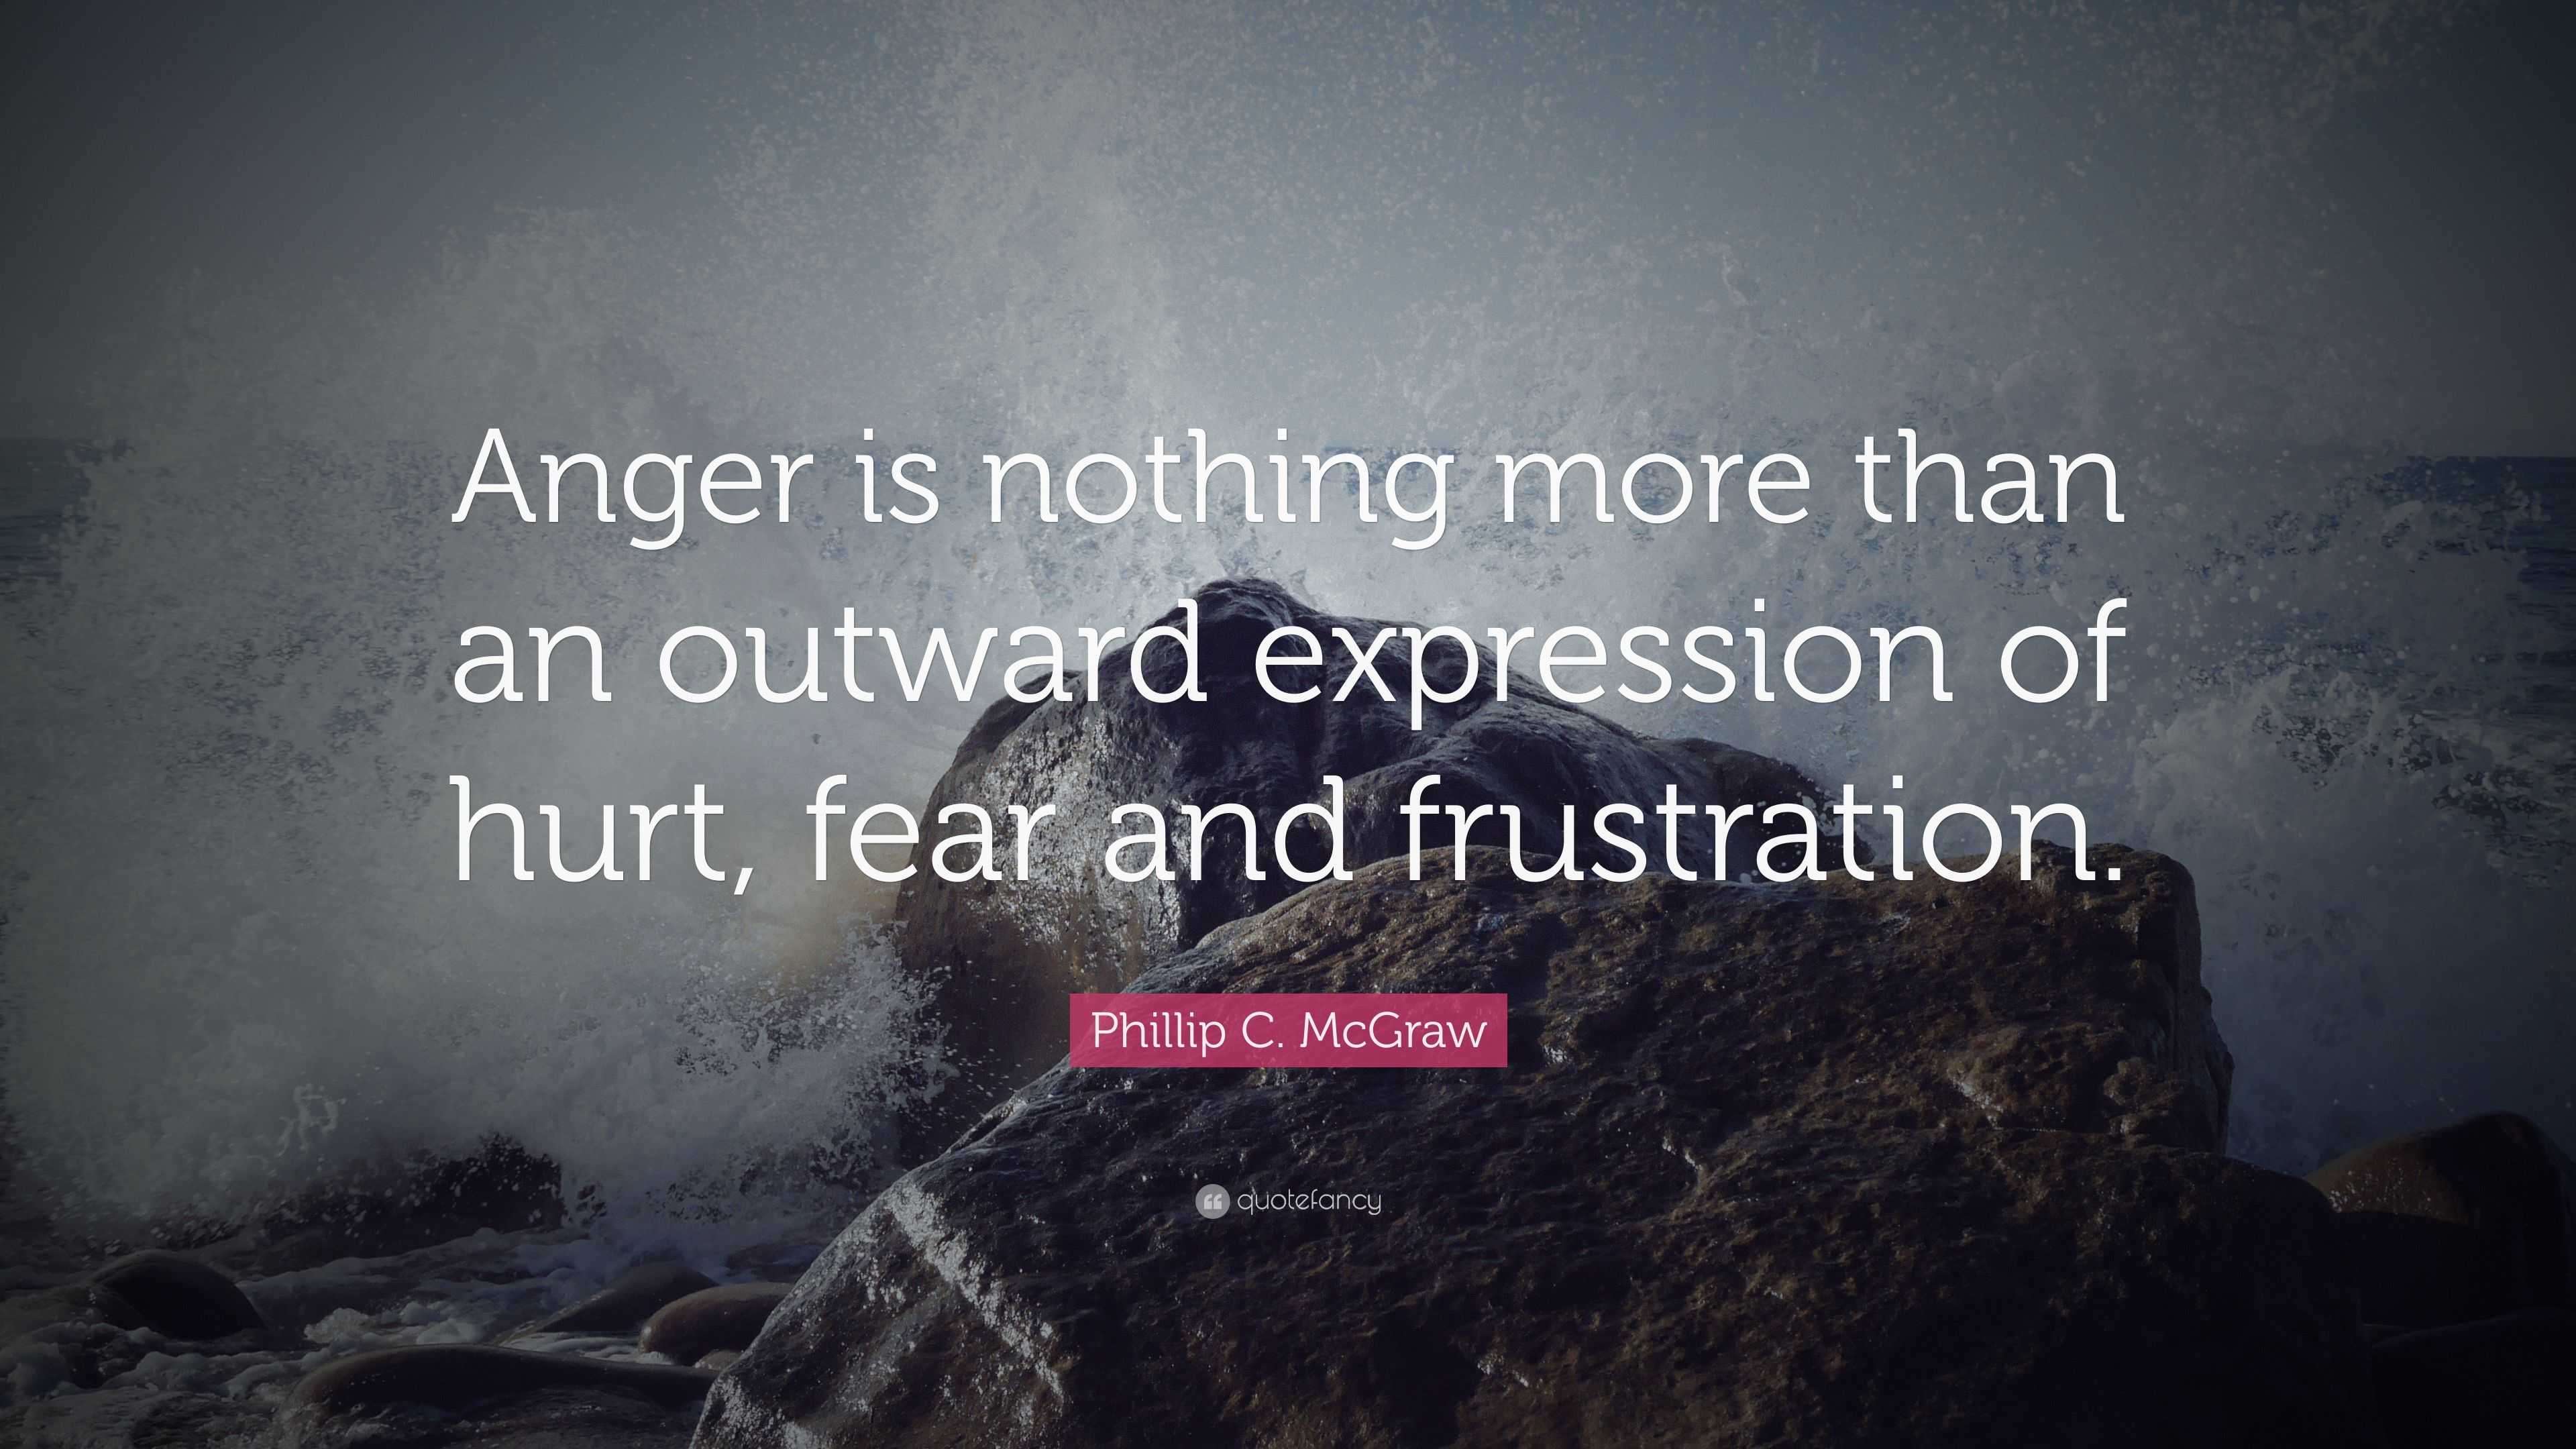 Phillip C. McGraw Quote: “Anger is nothing more than an outward